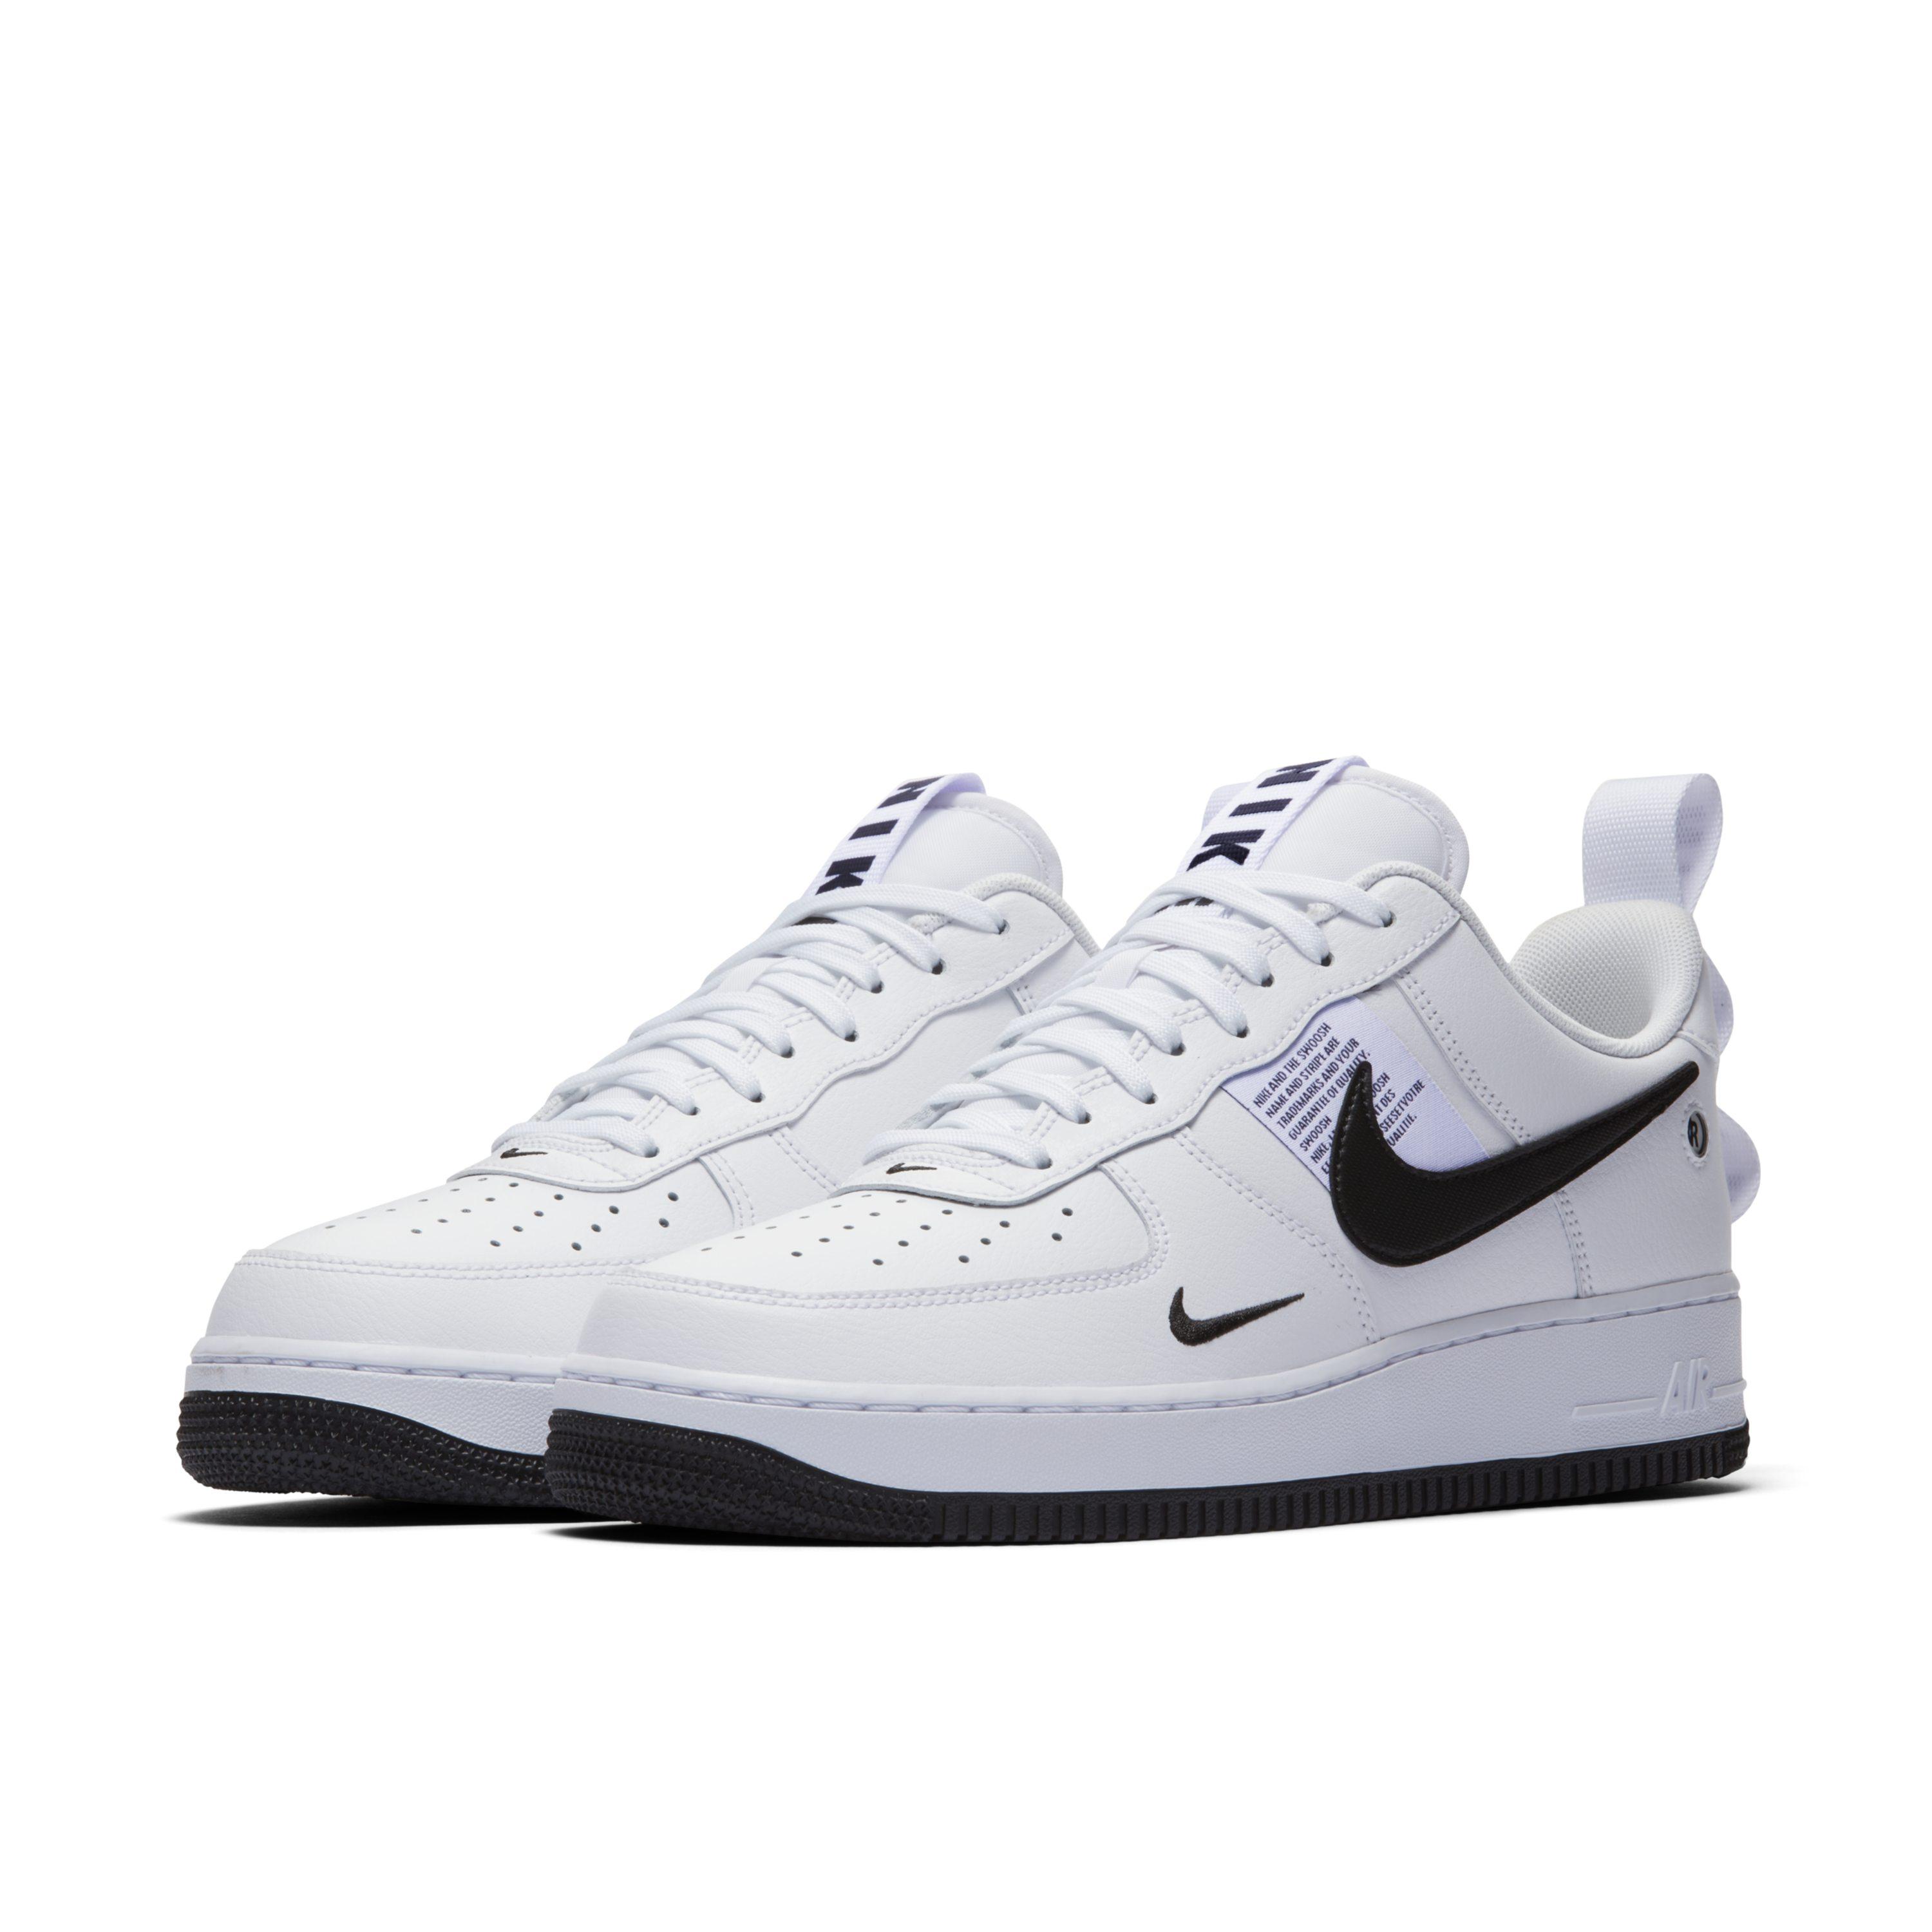 Nike Air Force 1 Lv8 Ul Shoe in White for Men - Lyst